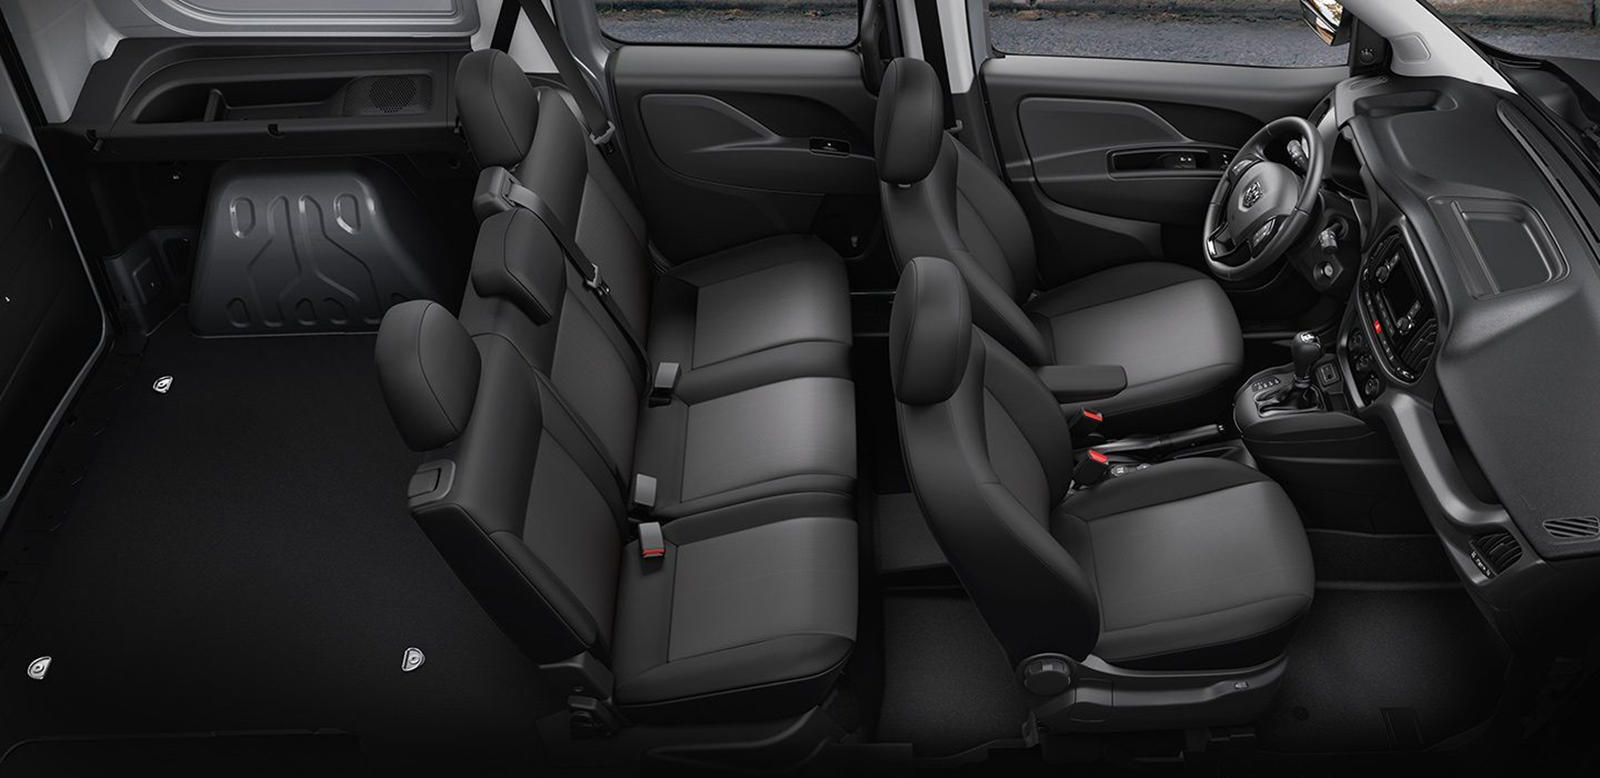 2022 Ram ProMaster City Passenger Wagon Interior Dimensions: Seating, Cargo  Space & Trunk Size - Photos | CarBuzz